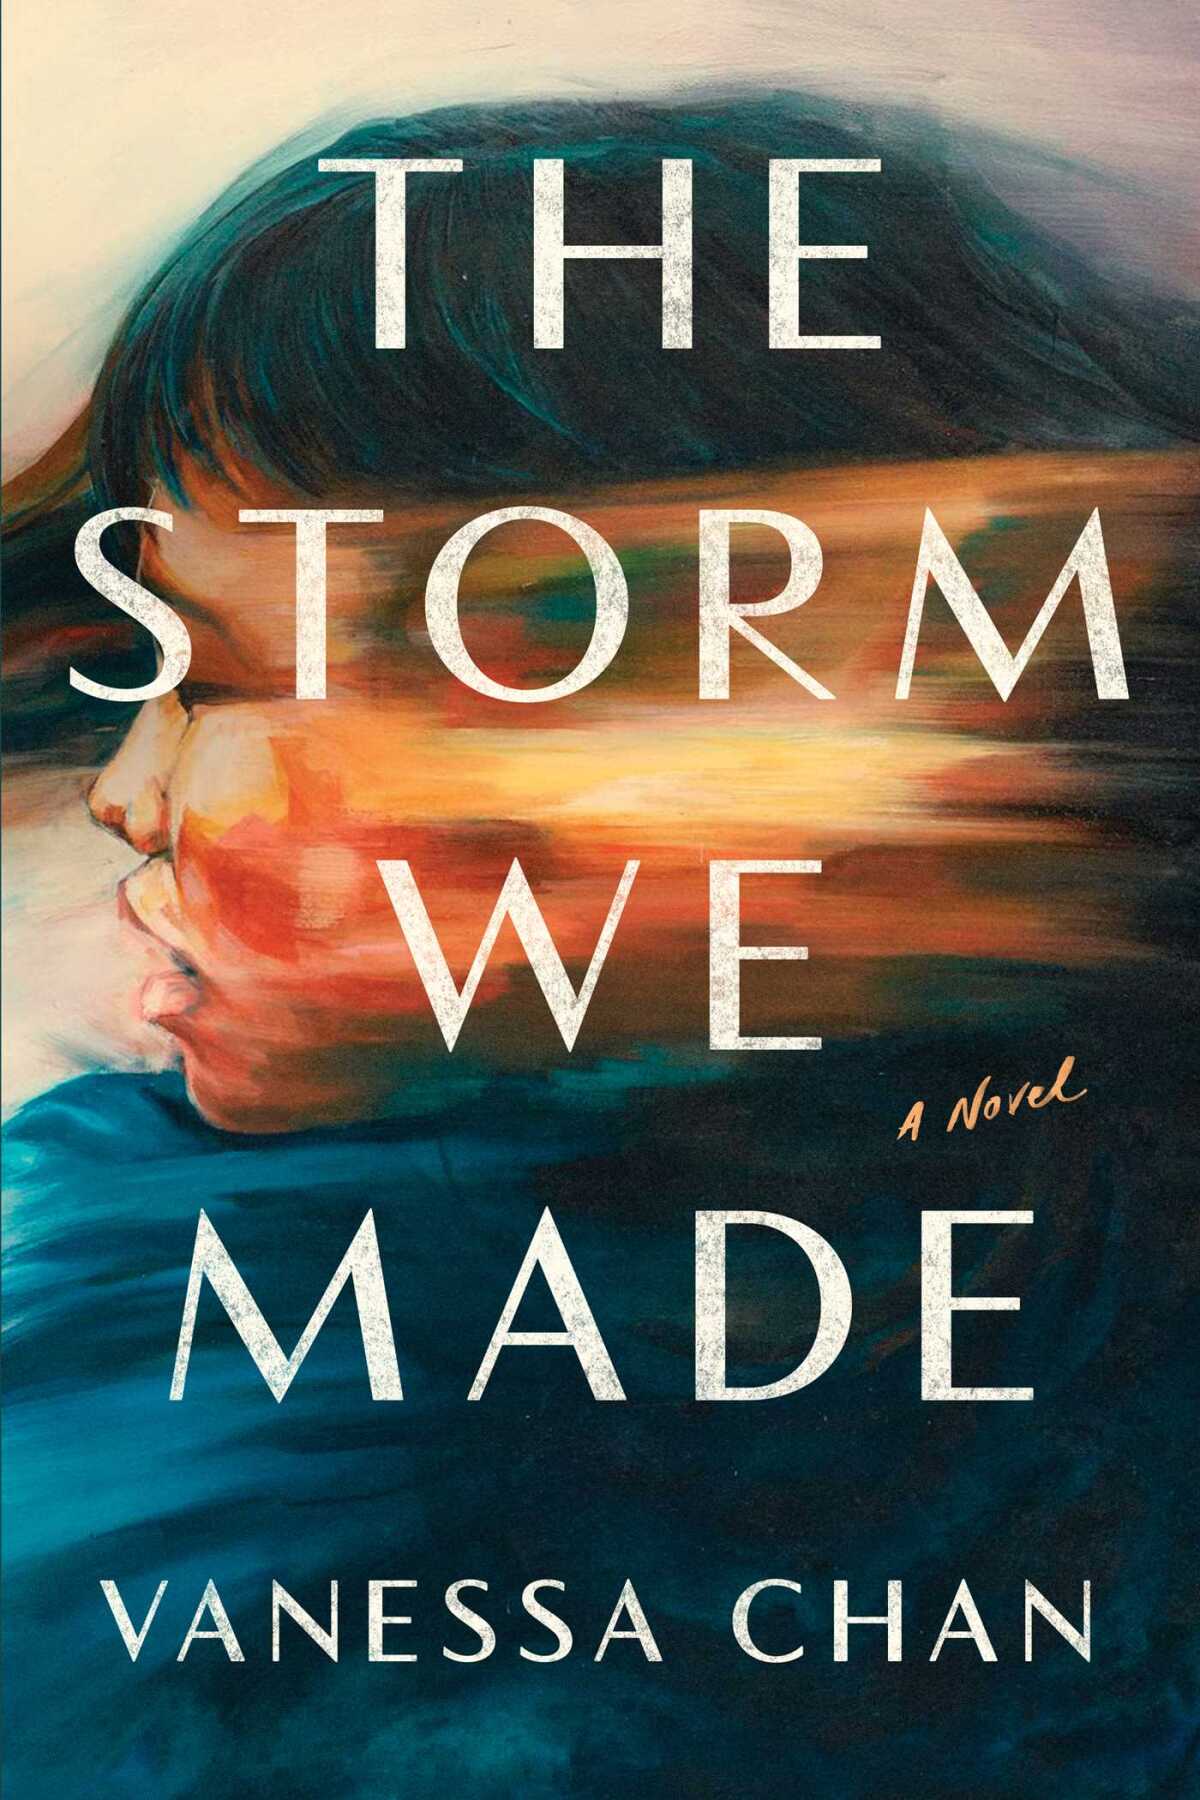 "The Storm We Made," by Vanessa Chan